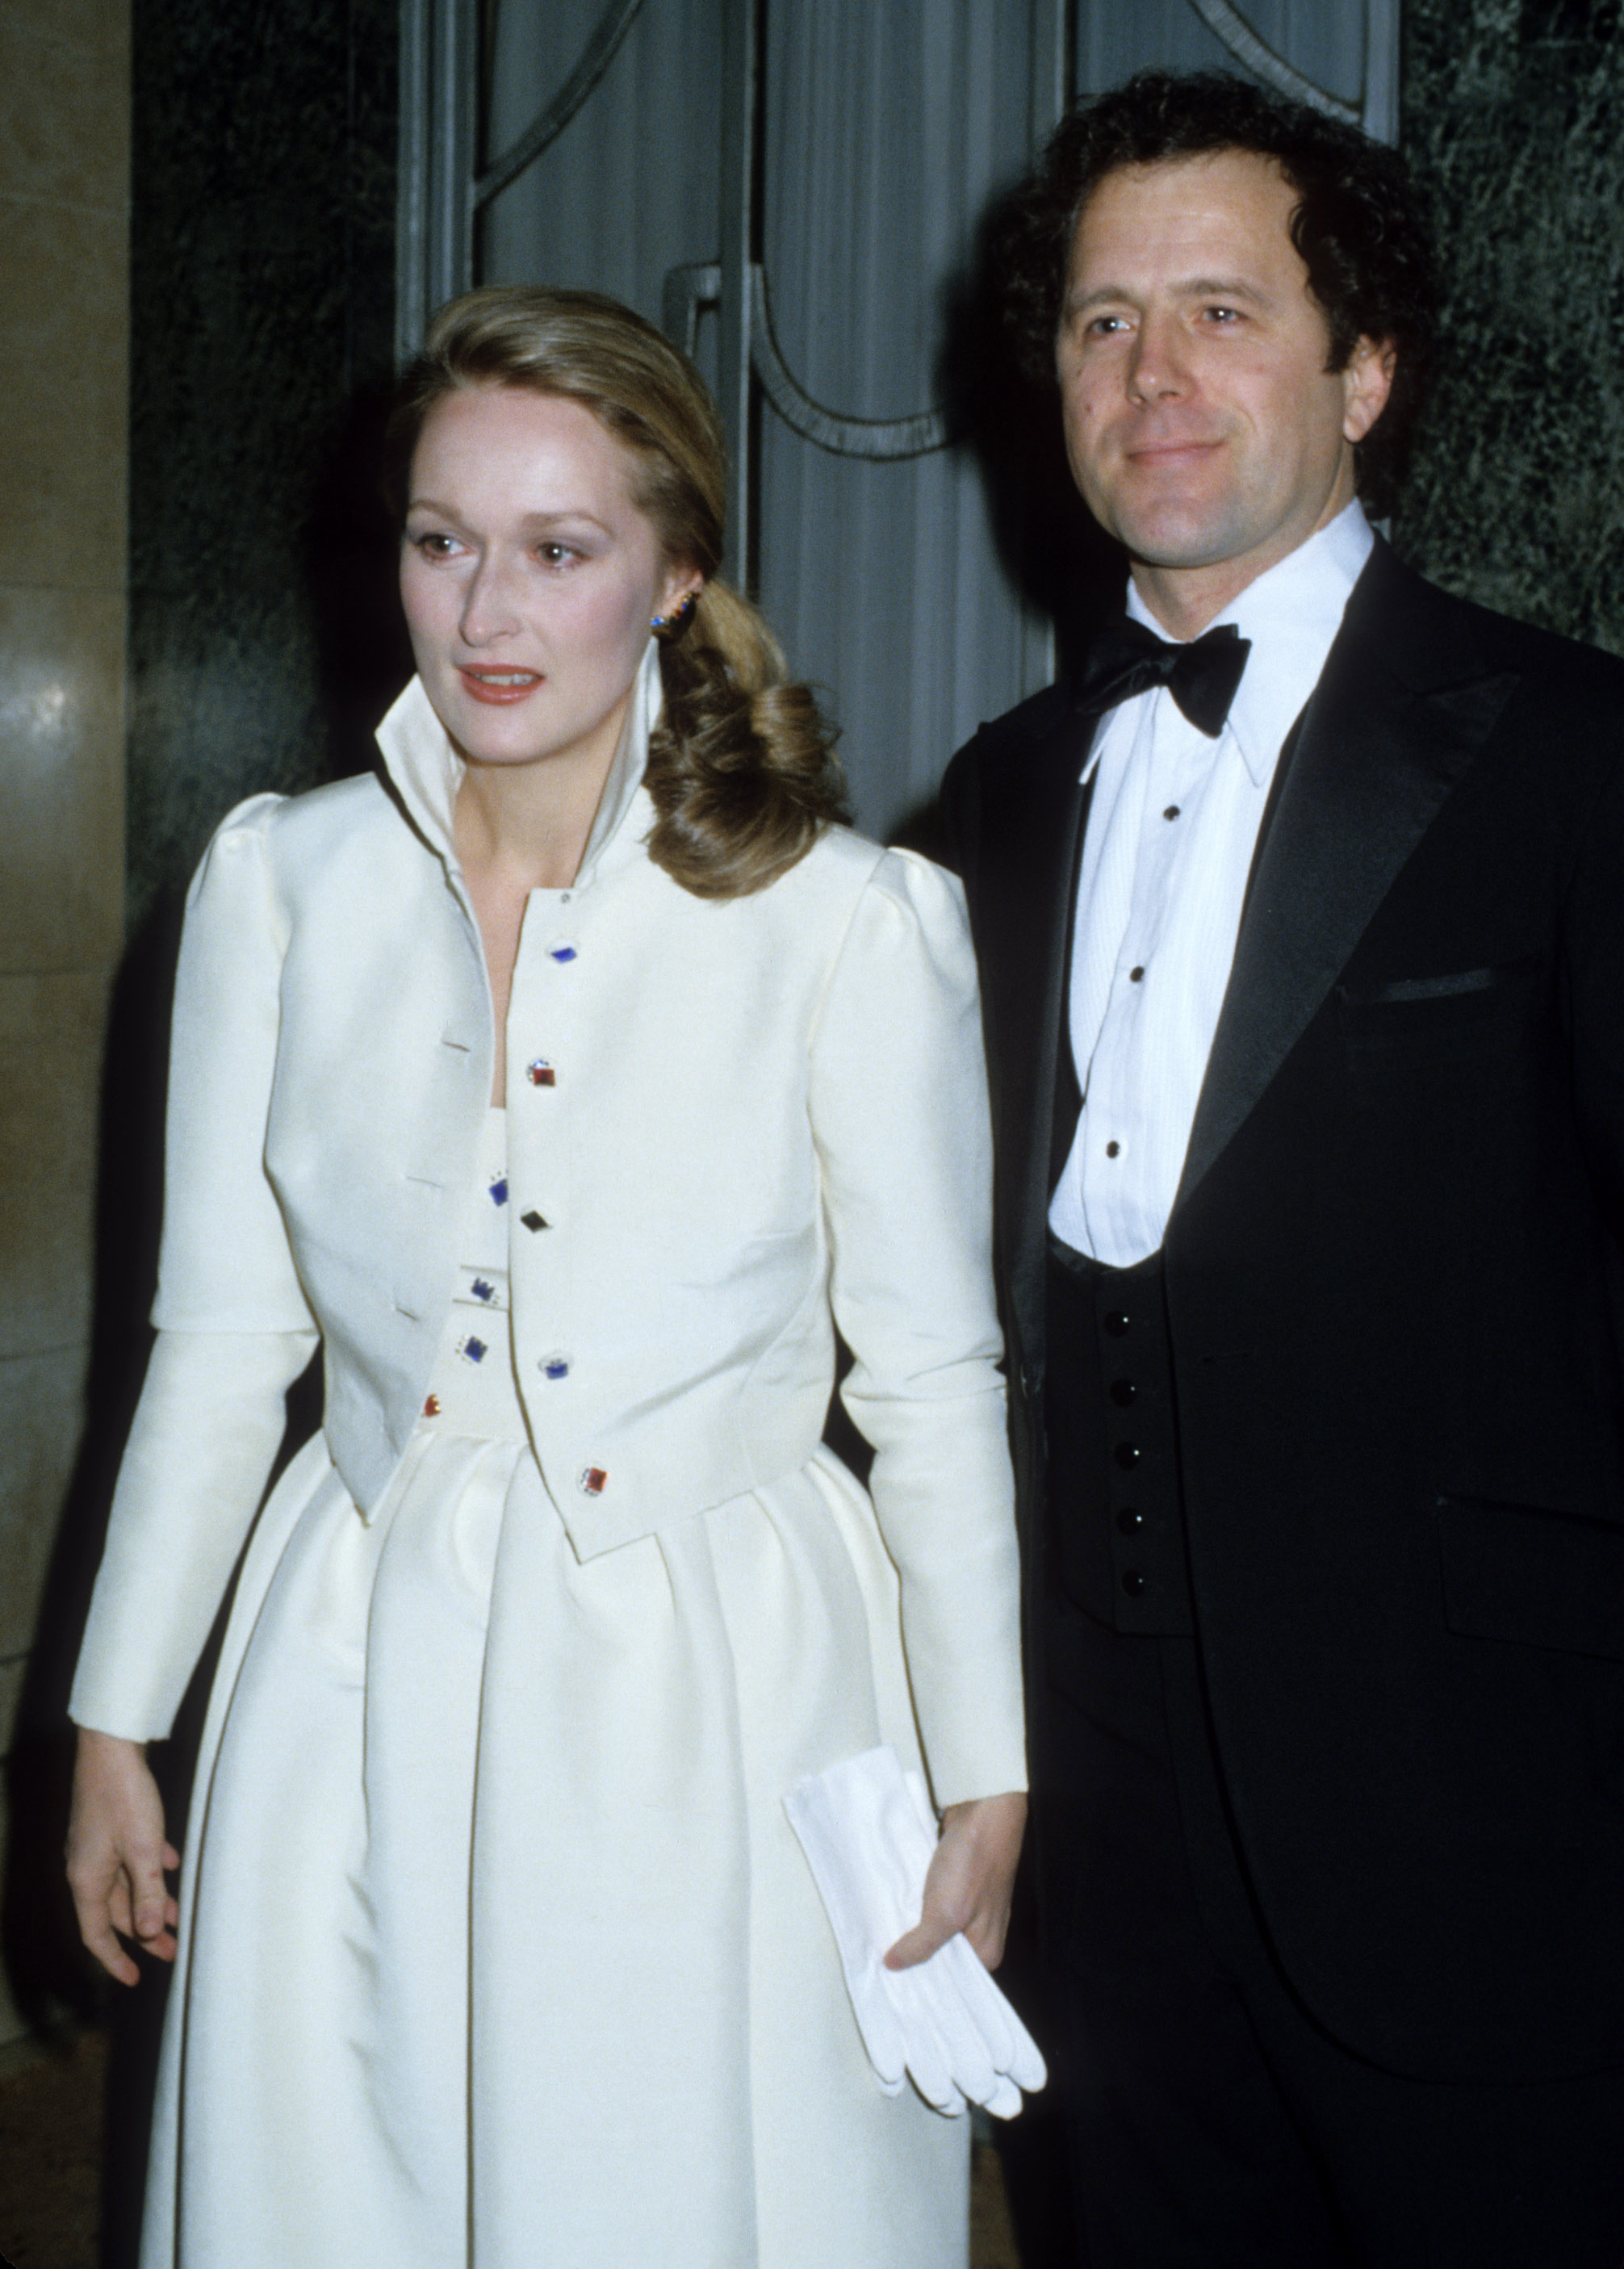 Meryl Streep and Don Gummer at Claridges Hotel in London, Great Britain, on March 25, 1980. | Source: Getty Images